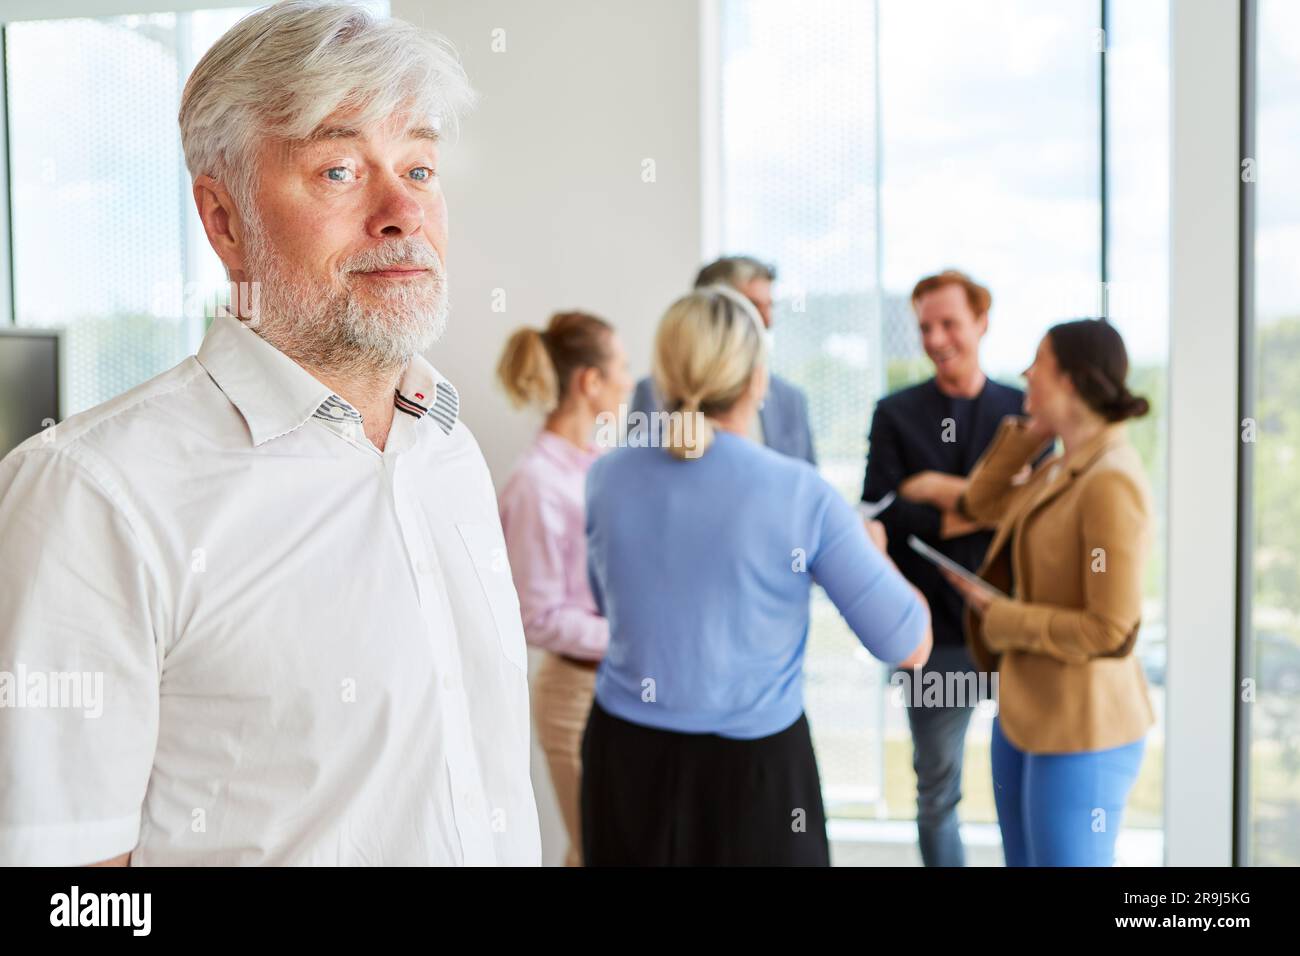 Thoughtful senior businessman with white hair and beard Stock Photo